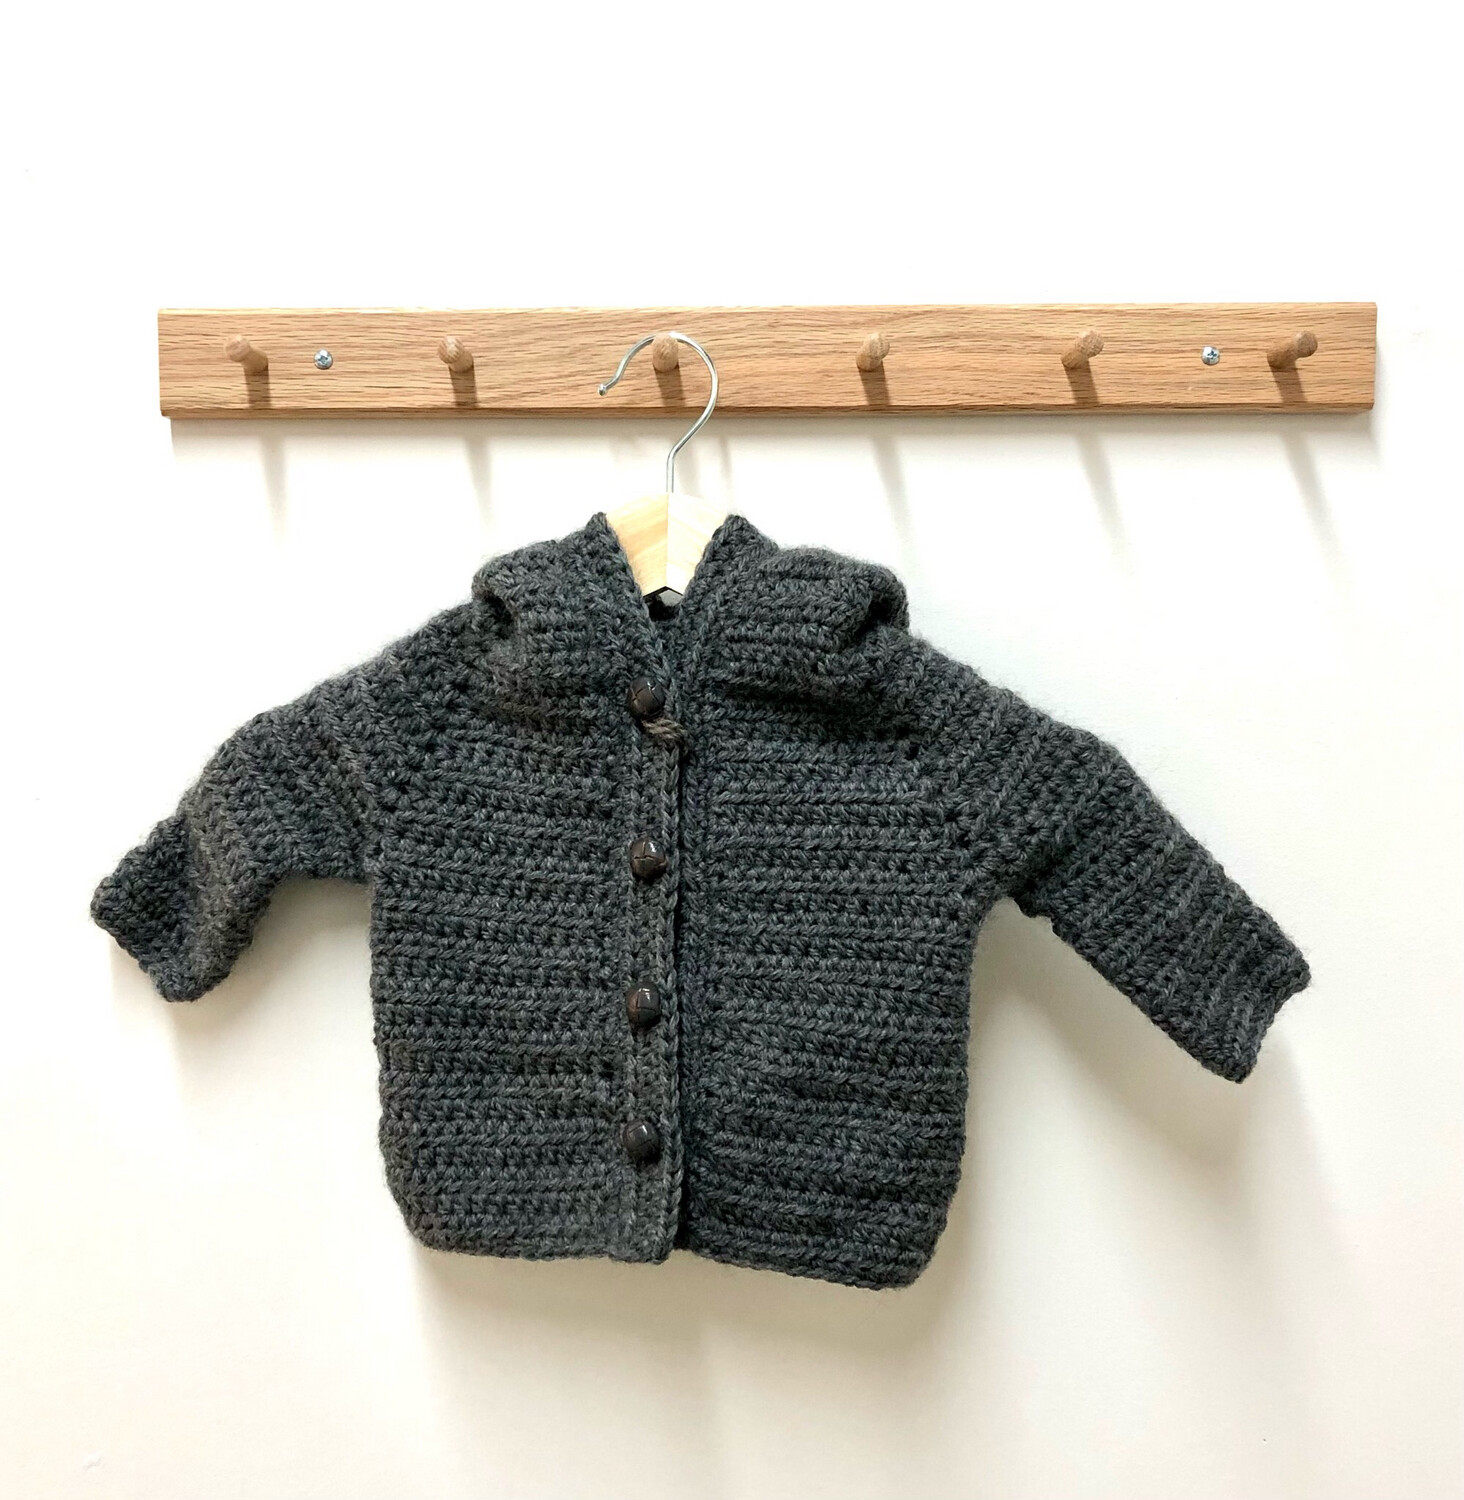 Grey Knit Baby Hooded Cardigan 12-24 Months, 4 Buttons